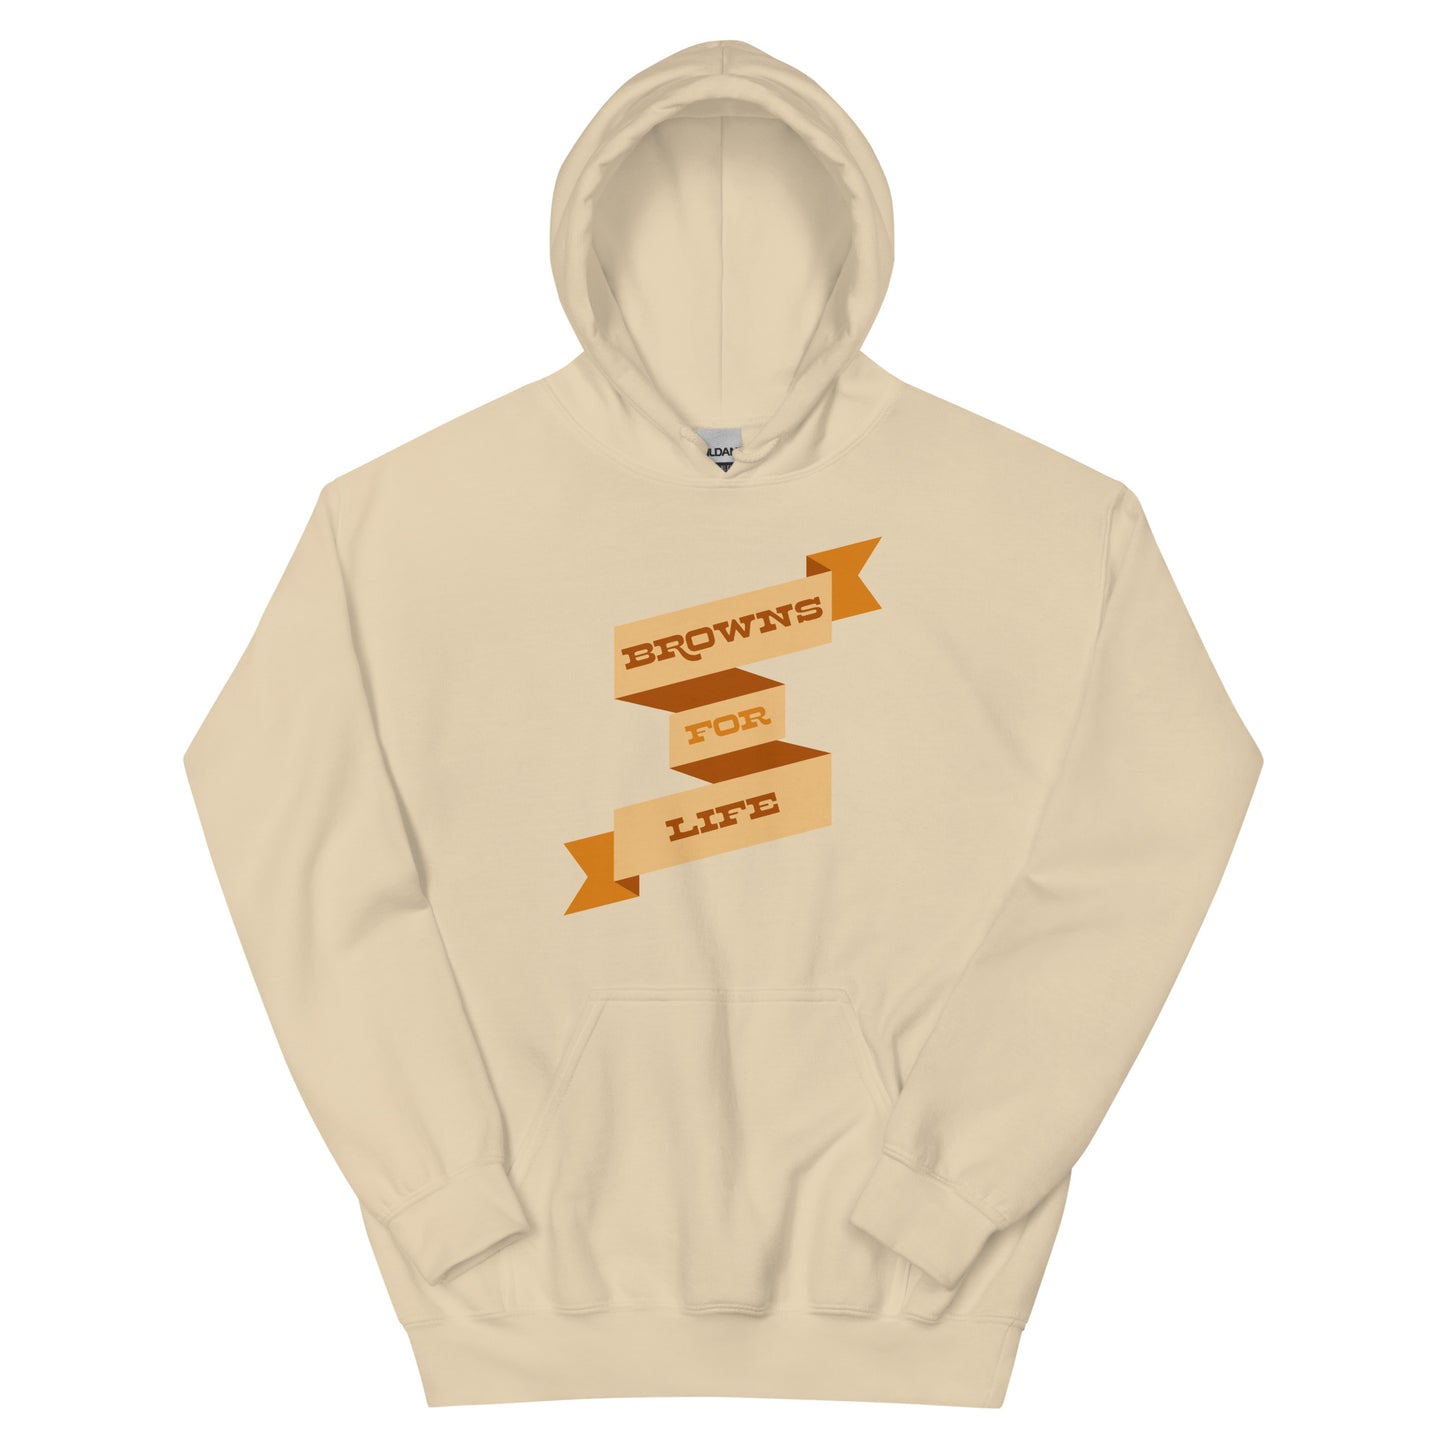 Browns for Life Unisex Hoodie